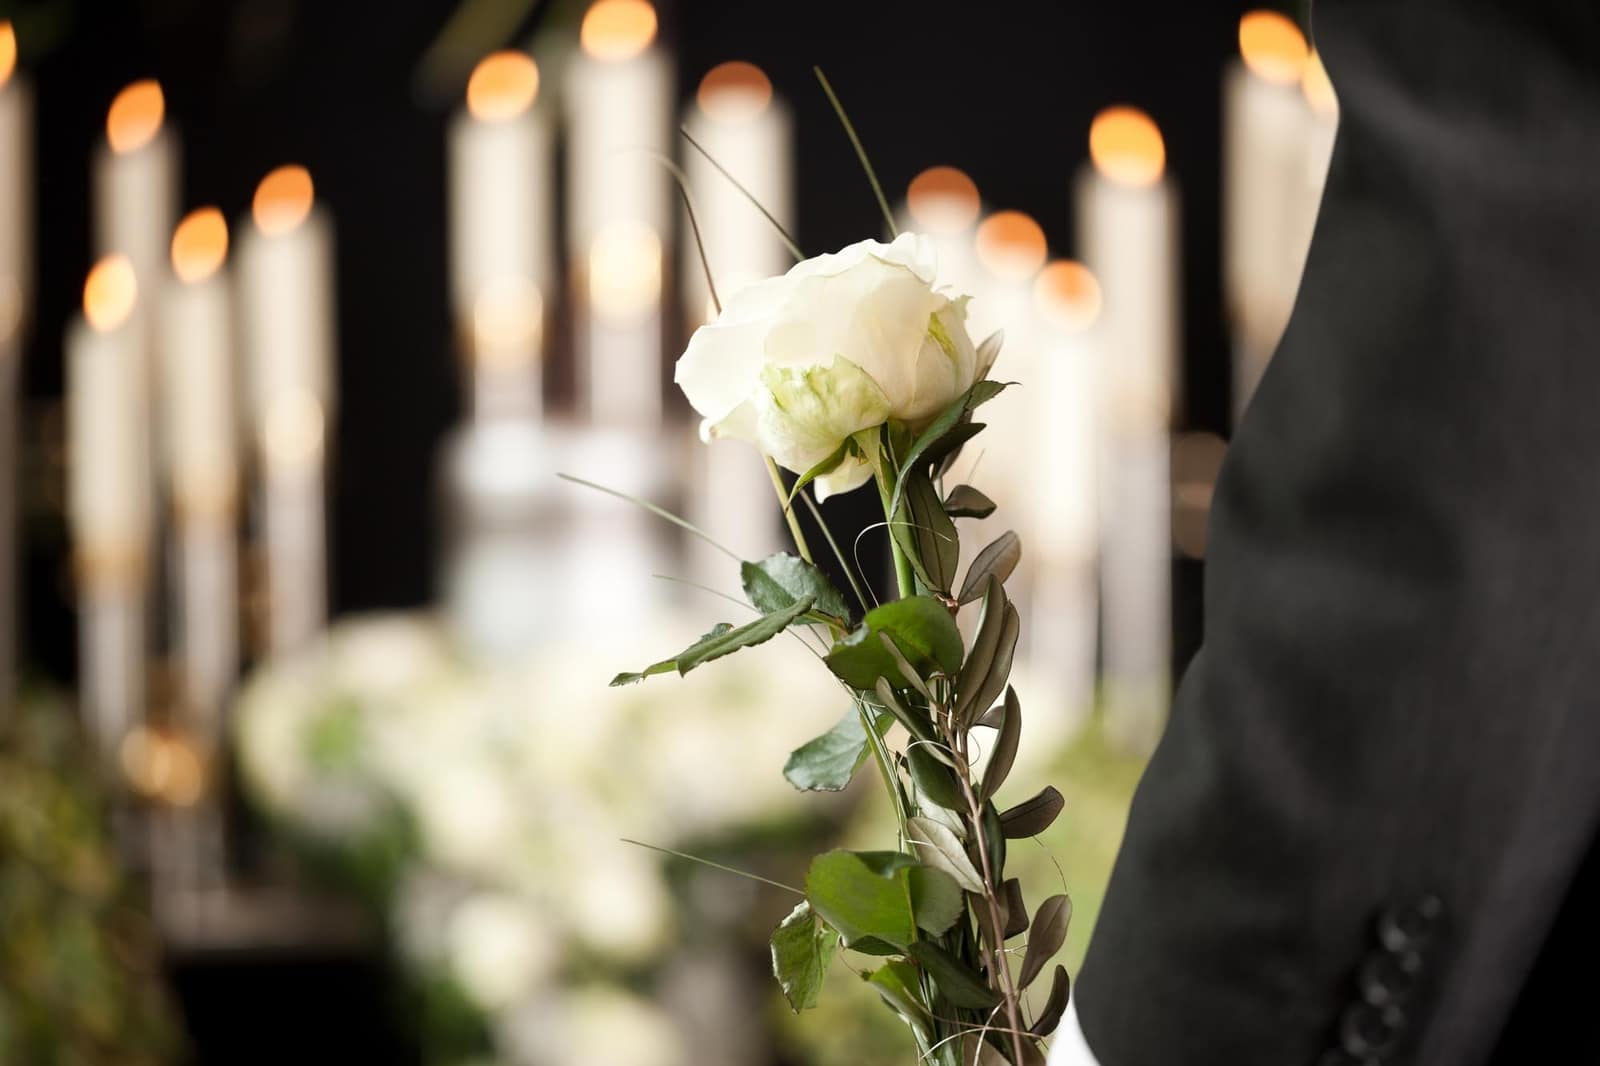 Person wearing black suit with only arm showing holding two white roses at funeral